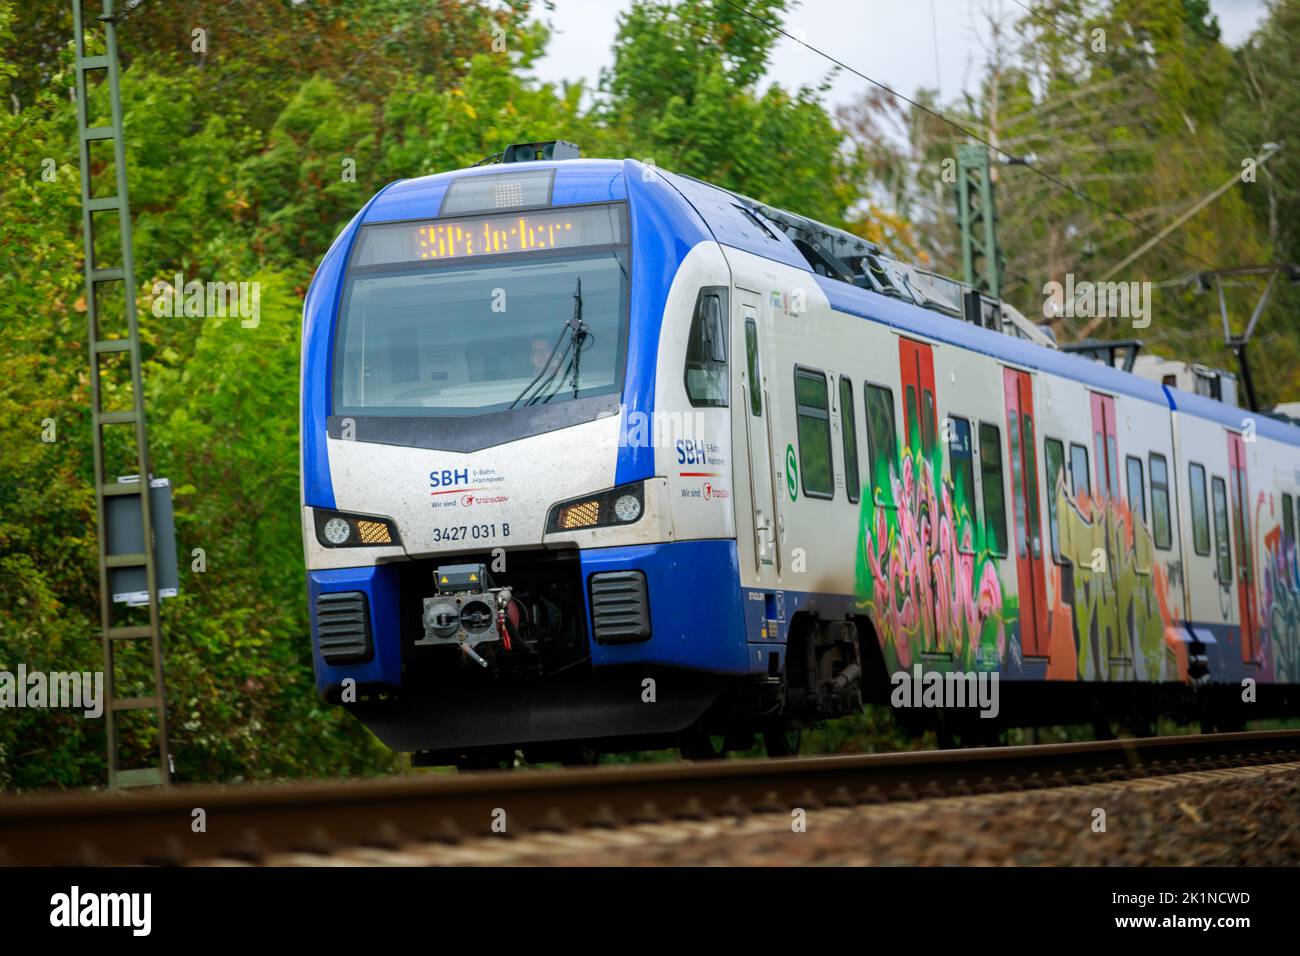 Hannover/Germany - September 17, 2022: Train from SBH, Transdev (S-Bahn Hannover) drives on railroad track in Hannover. Stock Photo